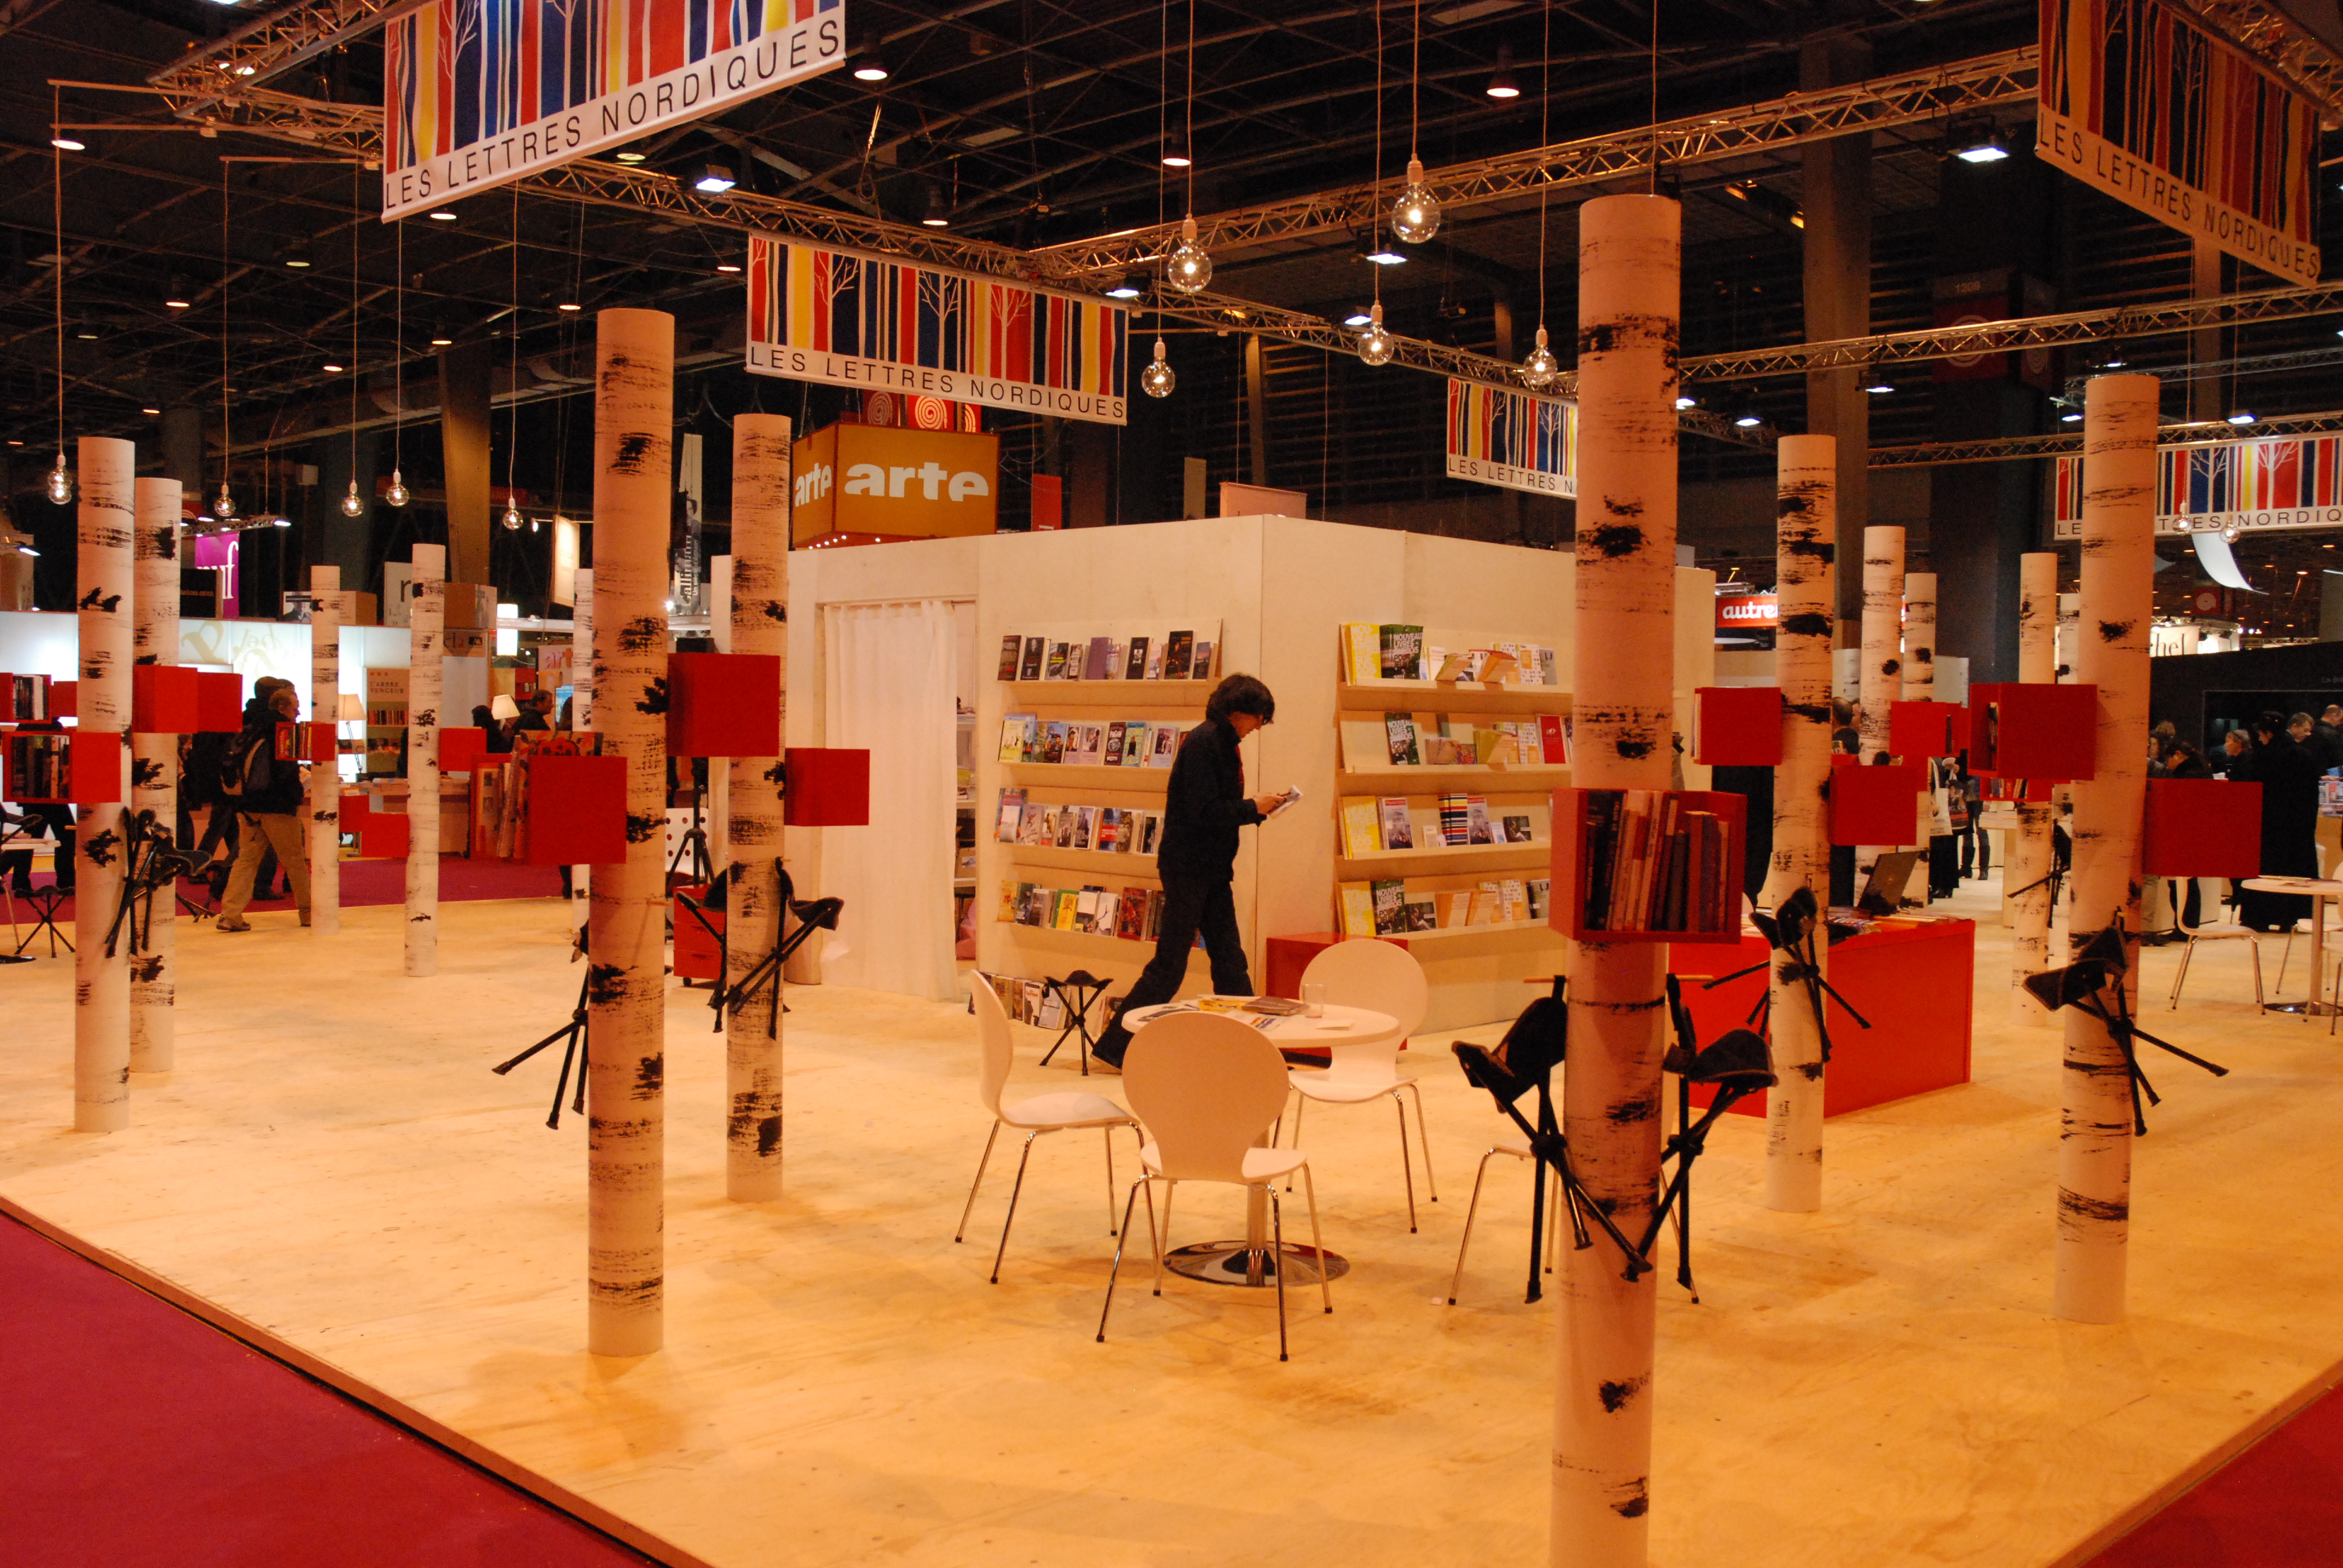 A hall with an book exhibition